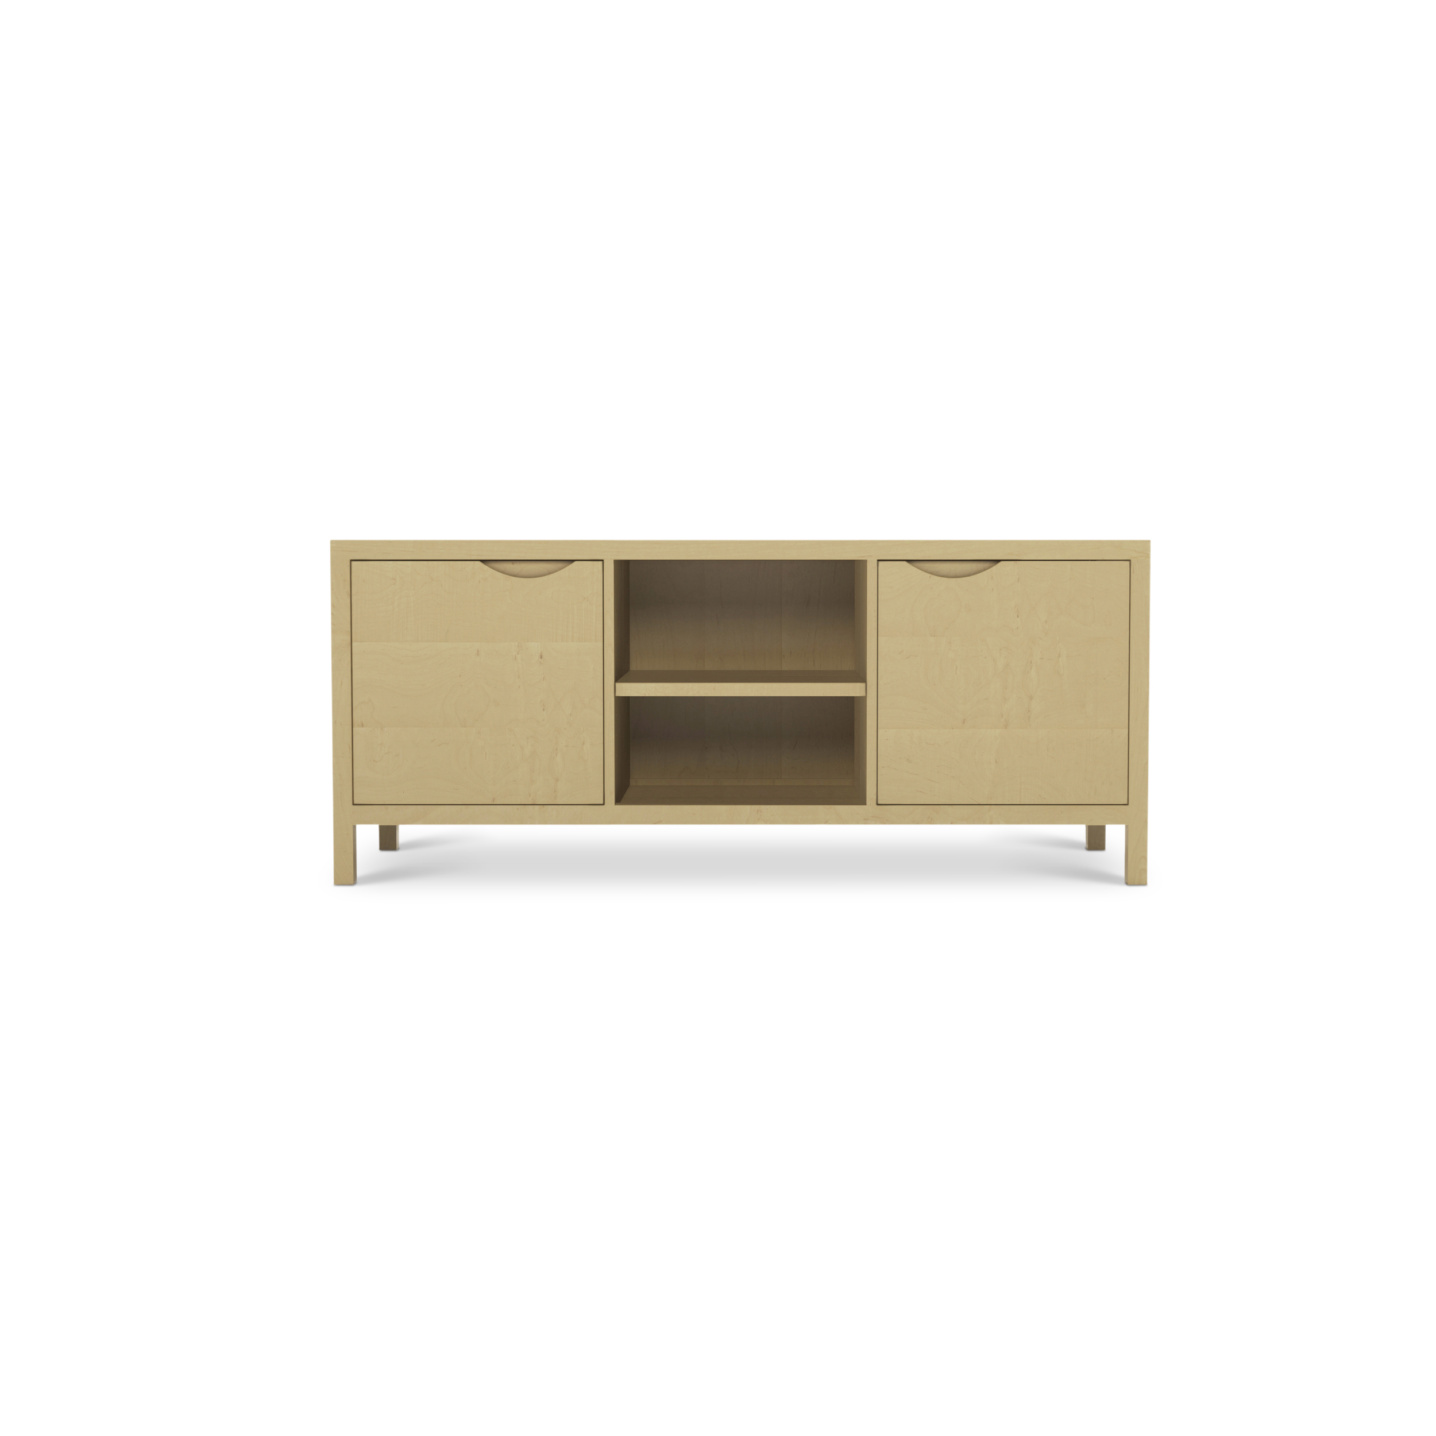 60" two door solid maple modern media console